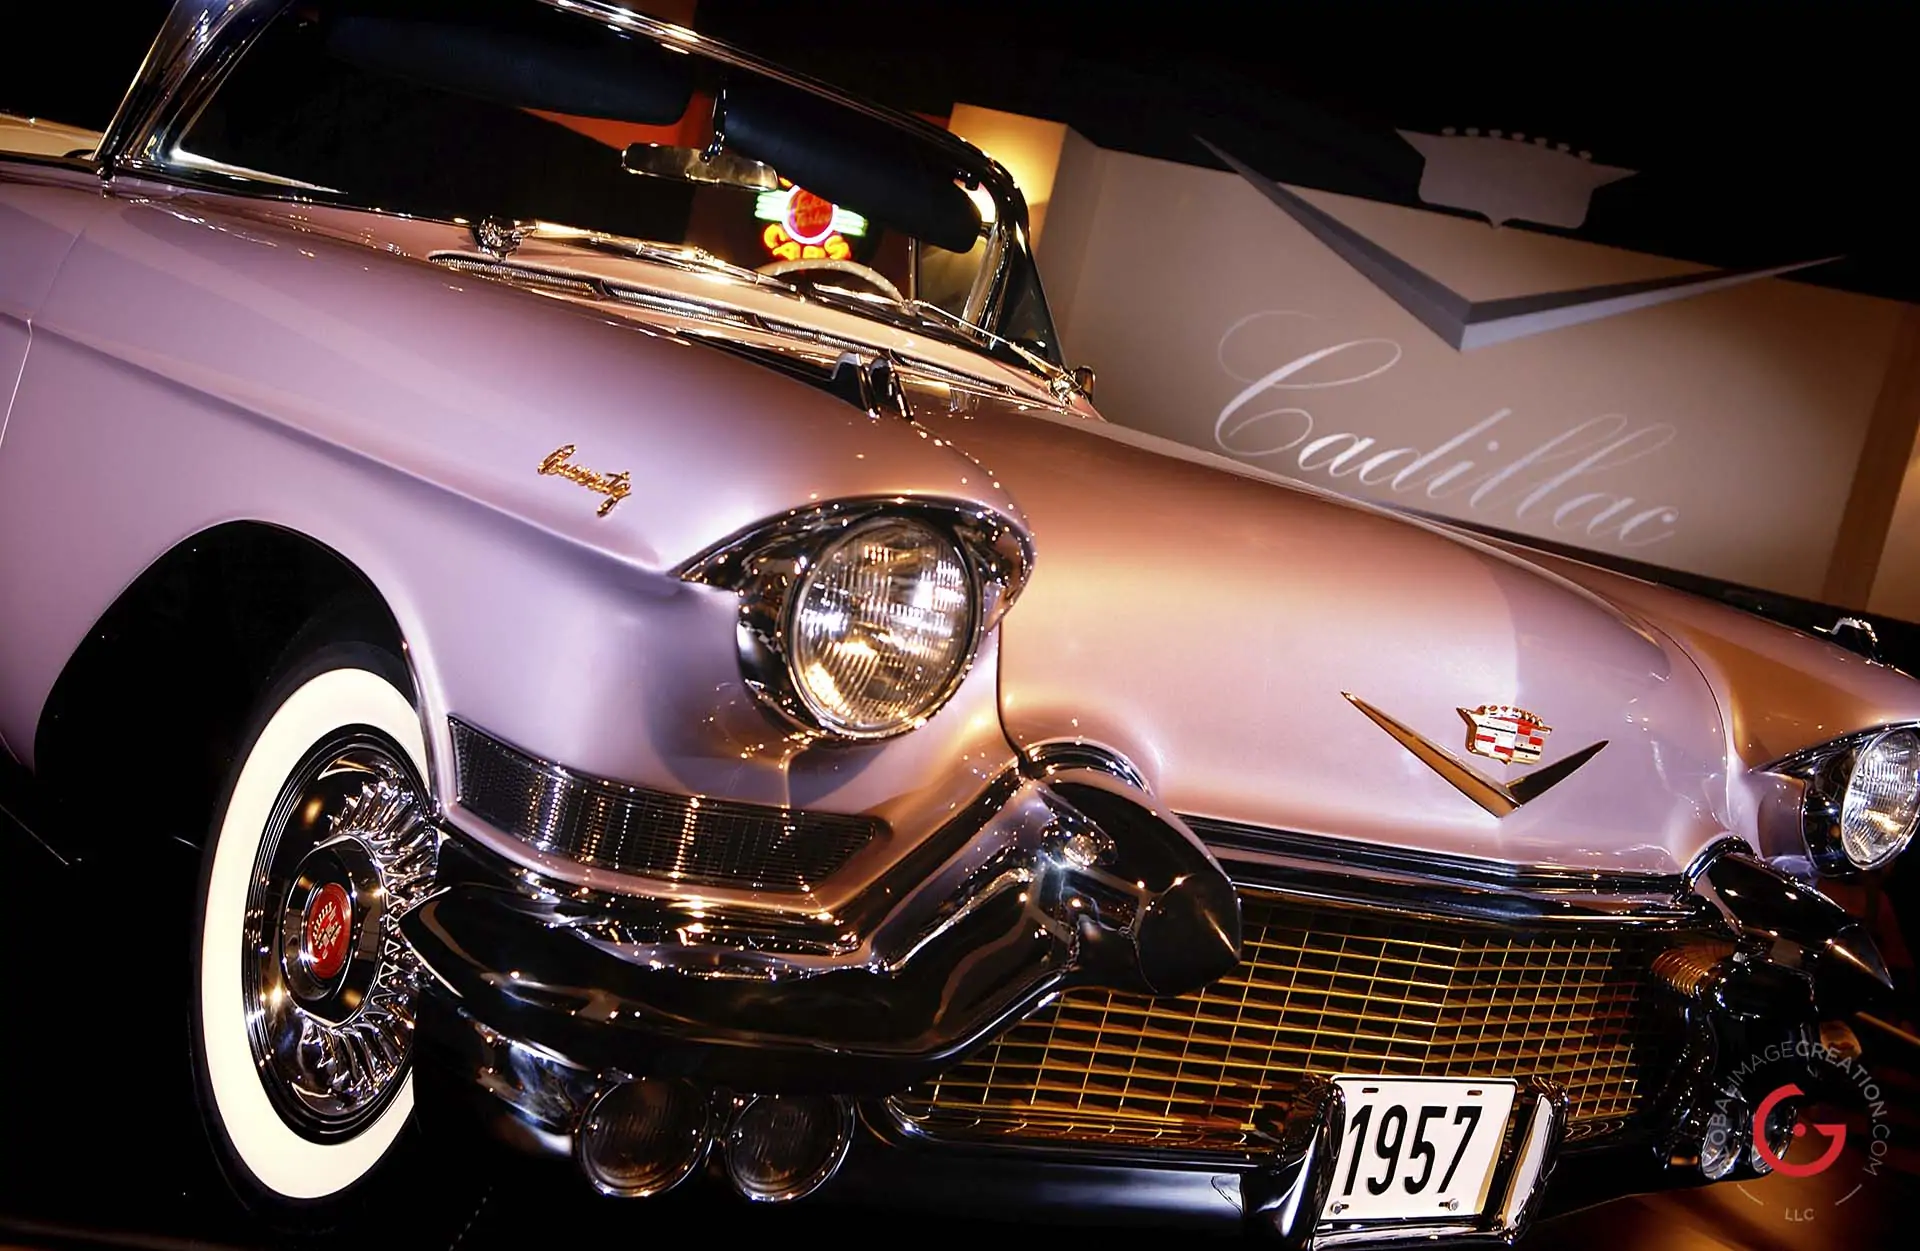 Pearled Pink Cadillac Front End Detail - Professional Car Photographer, Automotive Photography